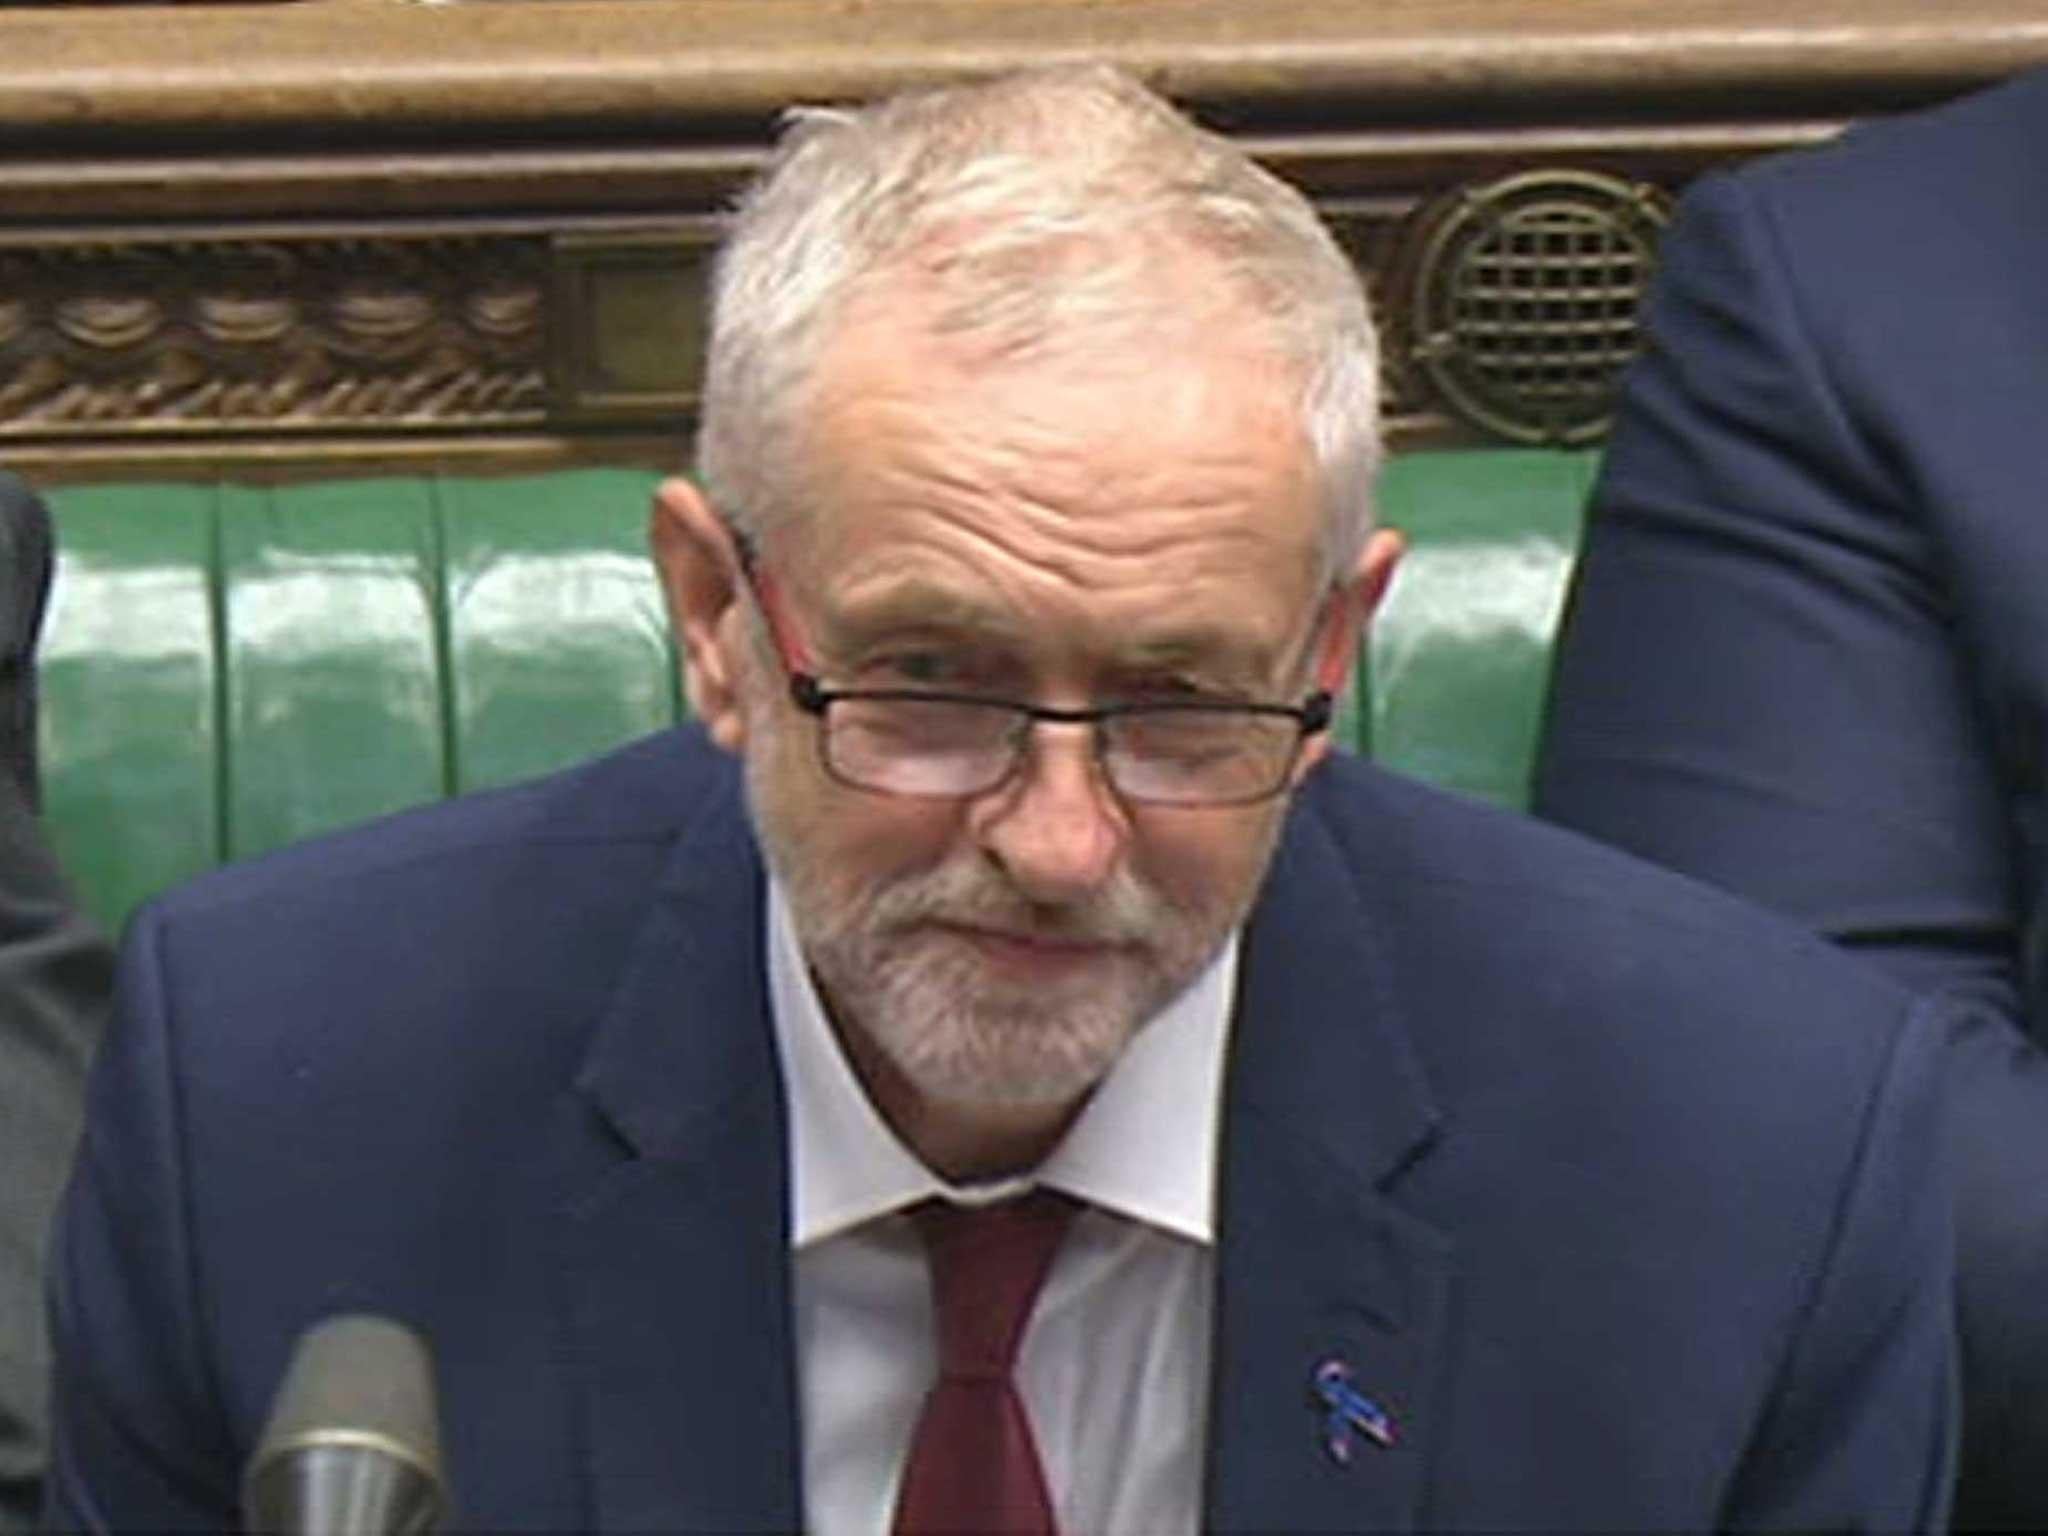 Jeremy Corbyn claimed the NHS is "on its knees", during Prime Minister's Question in the Commons